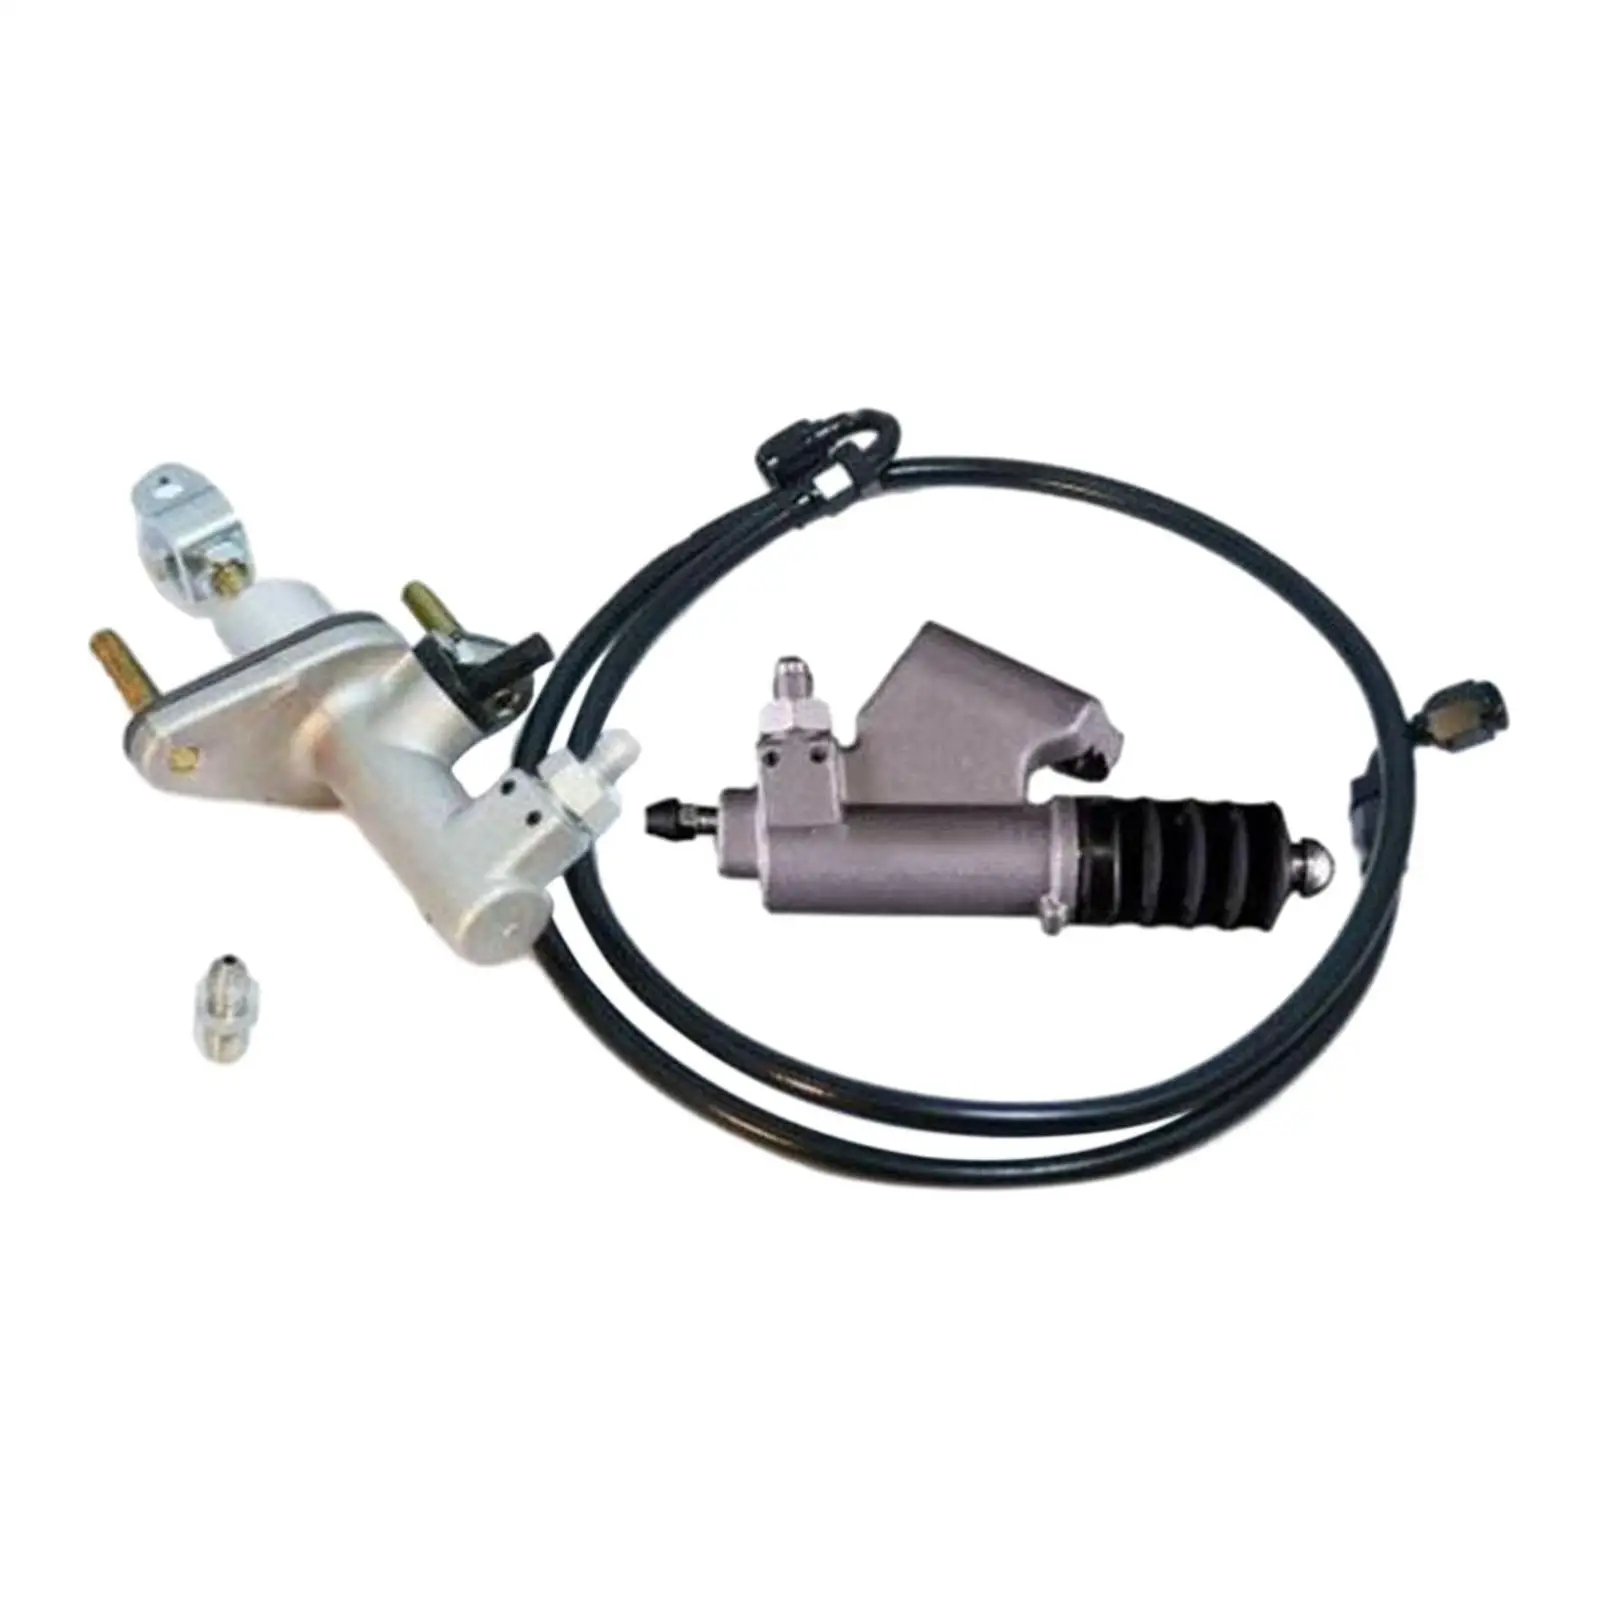 Ktd-clk-kms Complete Master Cylinder Slave Kit for Acura Vehicle Spare Parts Replacement Modification Stable Performance